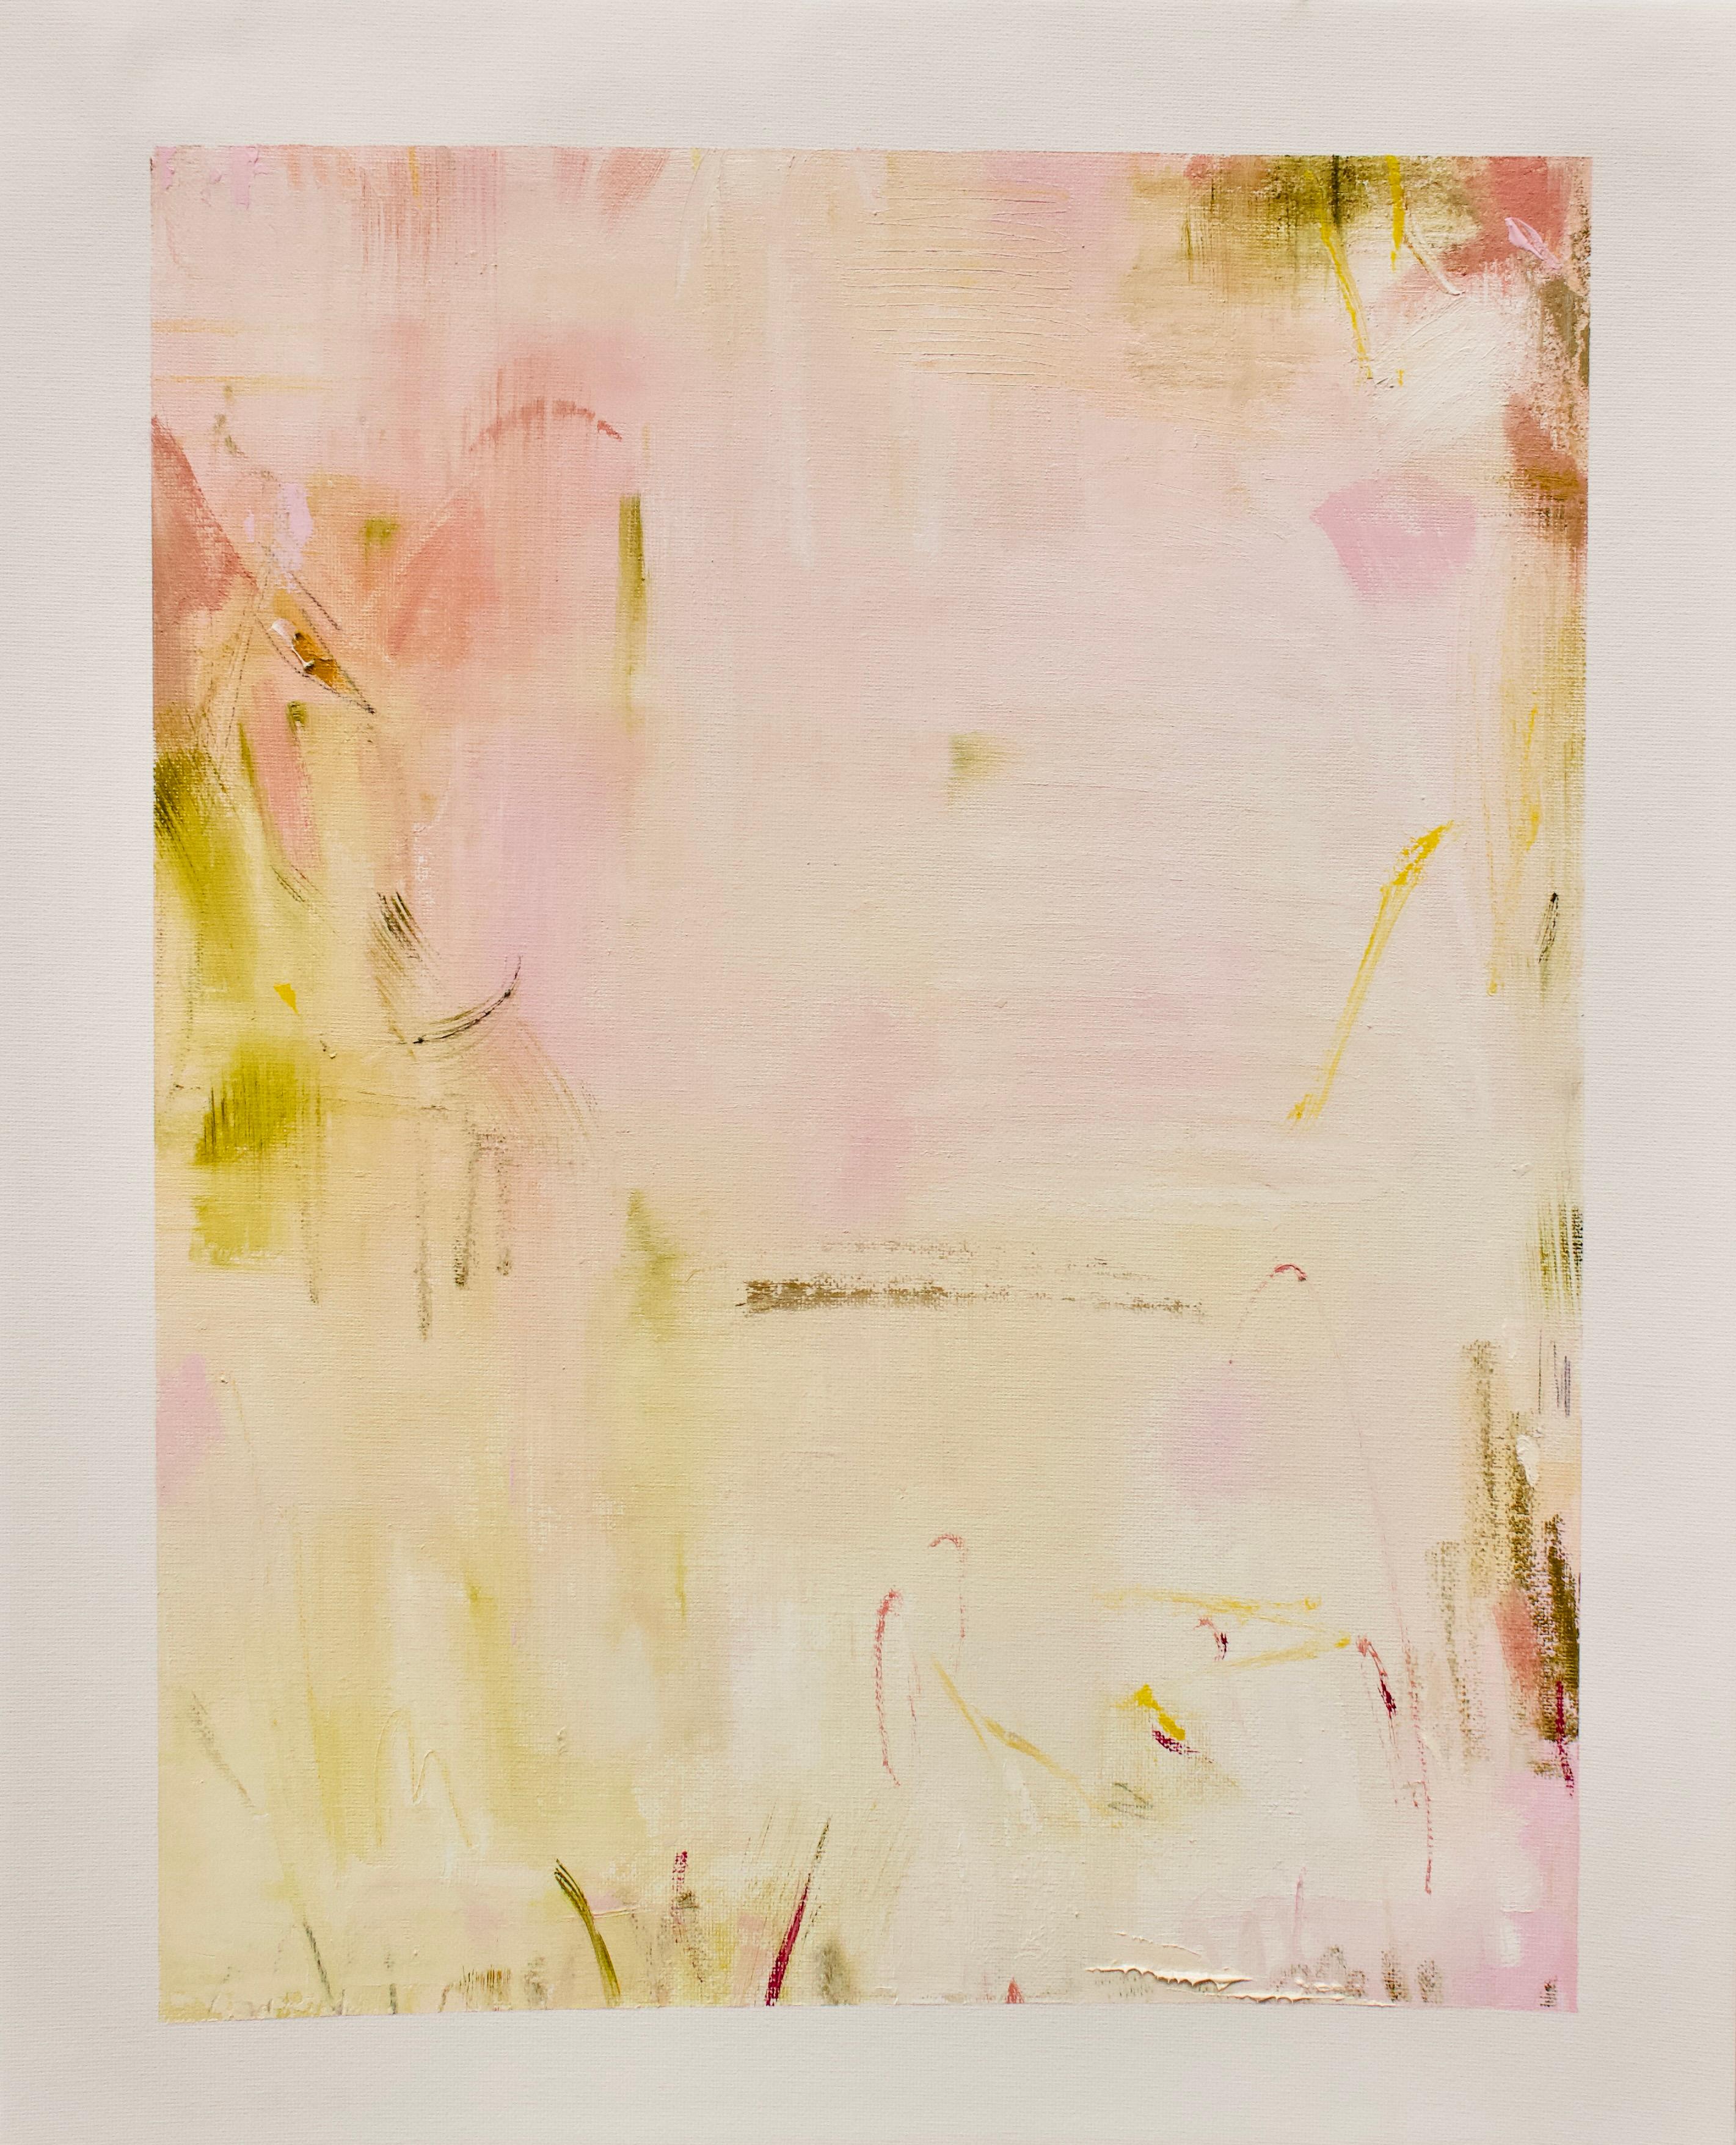 Lily was born and raised in Atlanta, Georgia. She grew up surrounded by art (her grandmother, mother, aunt, and cousin are all artists). In 2011, her mother, Meg Harrington, opened Huff Harrington Fine Art, a serene and inviting gallery nestled in a